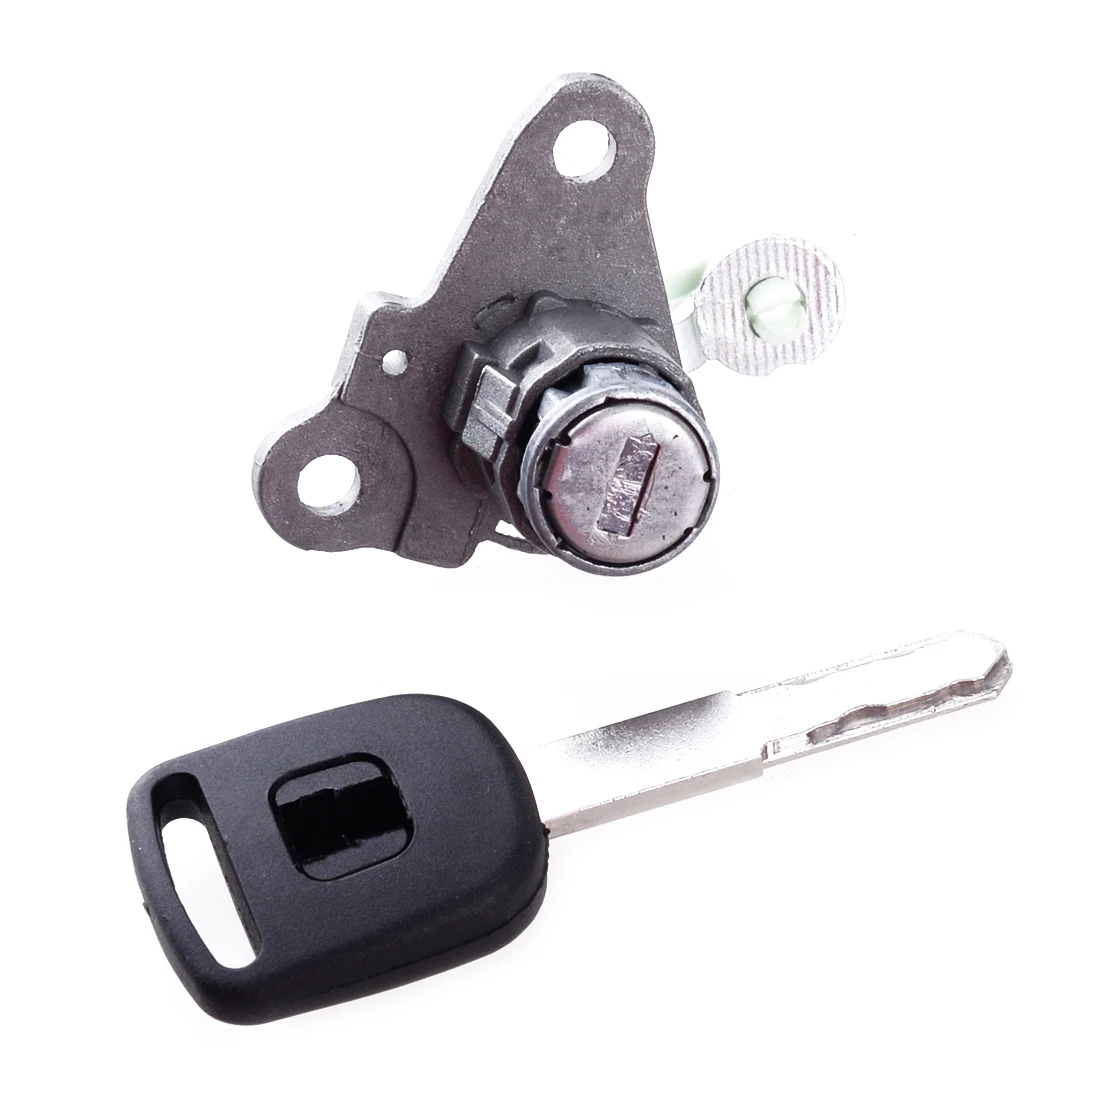 Car Left Door Lock Cylinder with Key Anti-theif Fit for Honda Fit Jazz 2003-2008